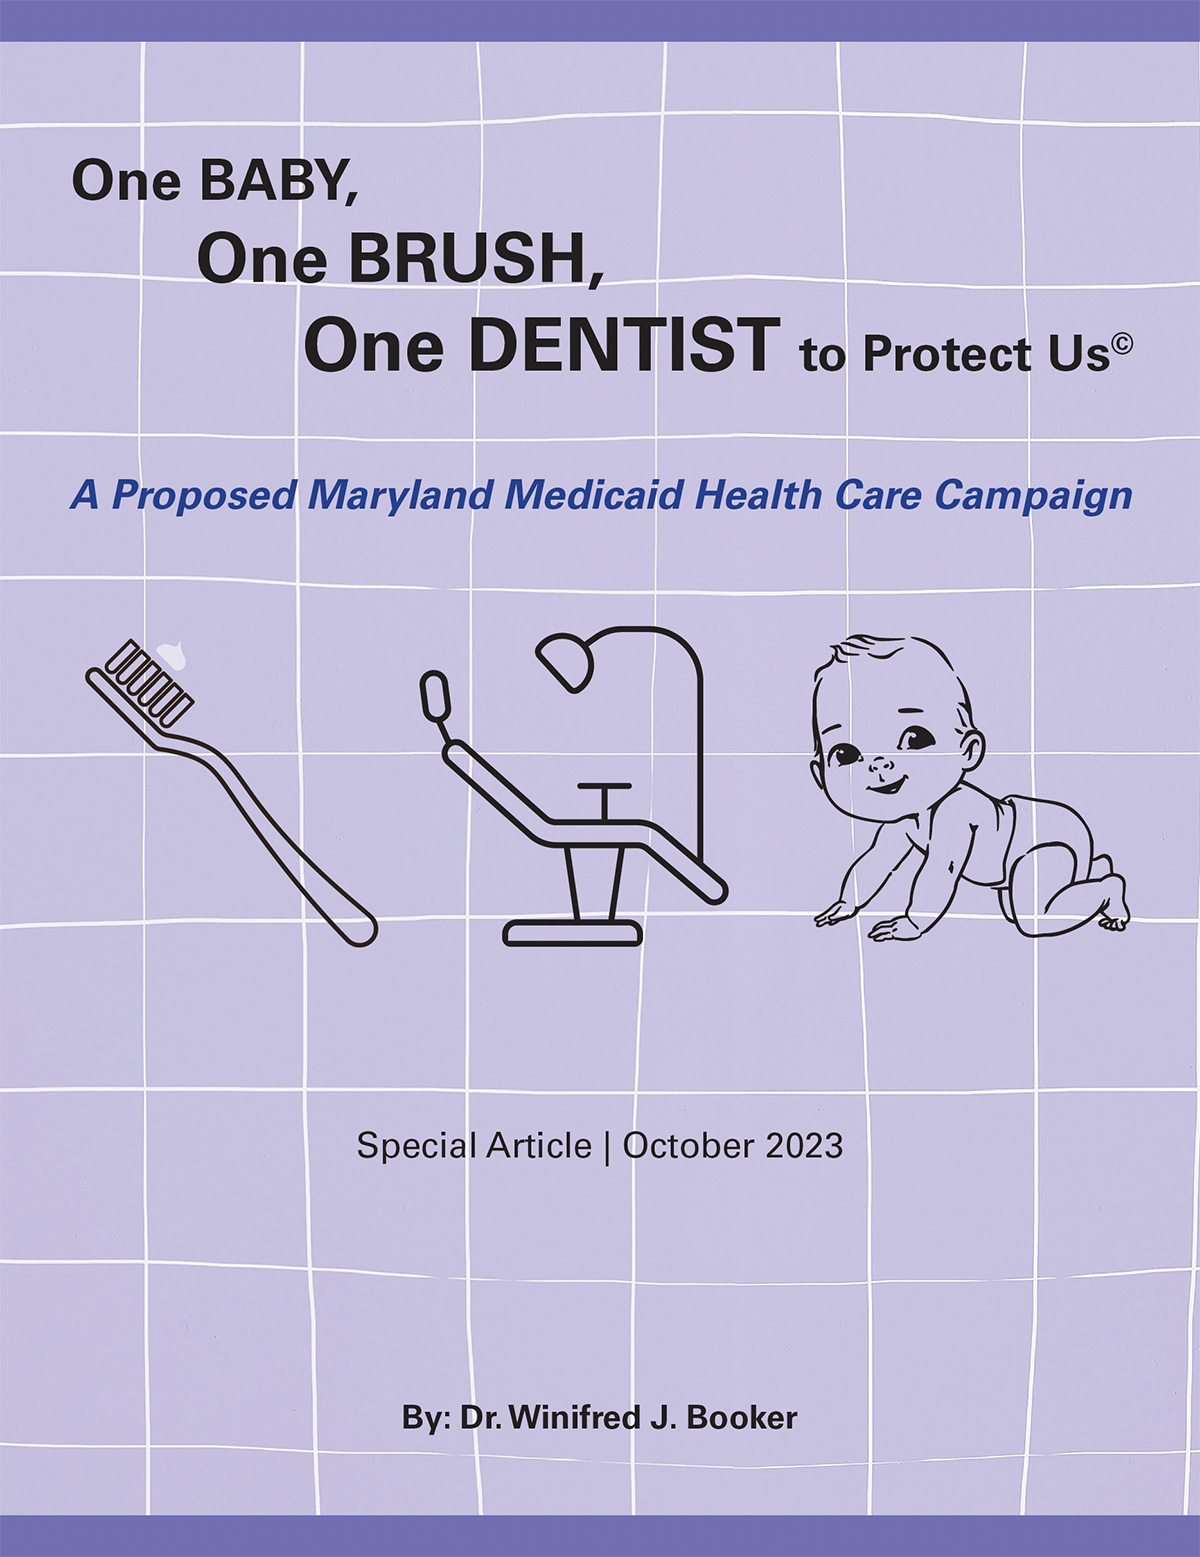 One BABY, One BRUSH, One DENTIST to Protect Us© article